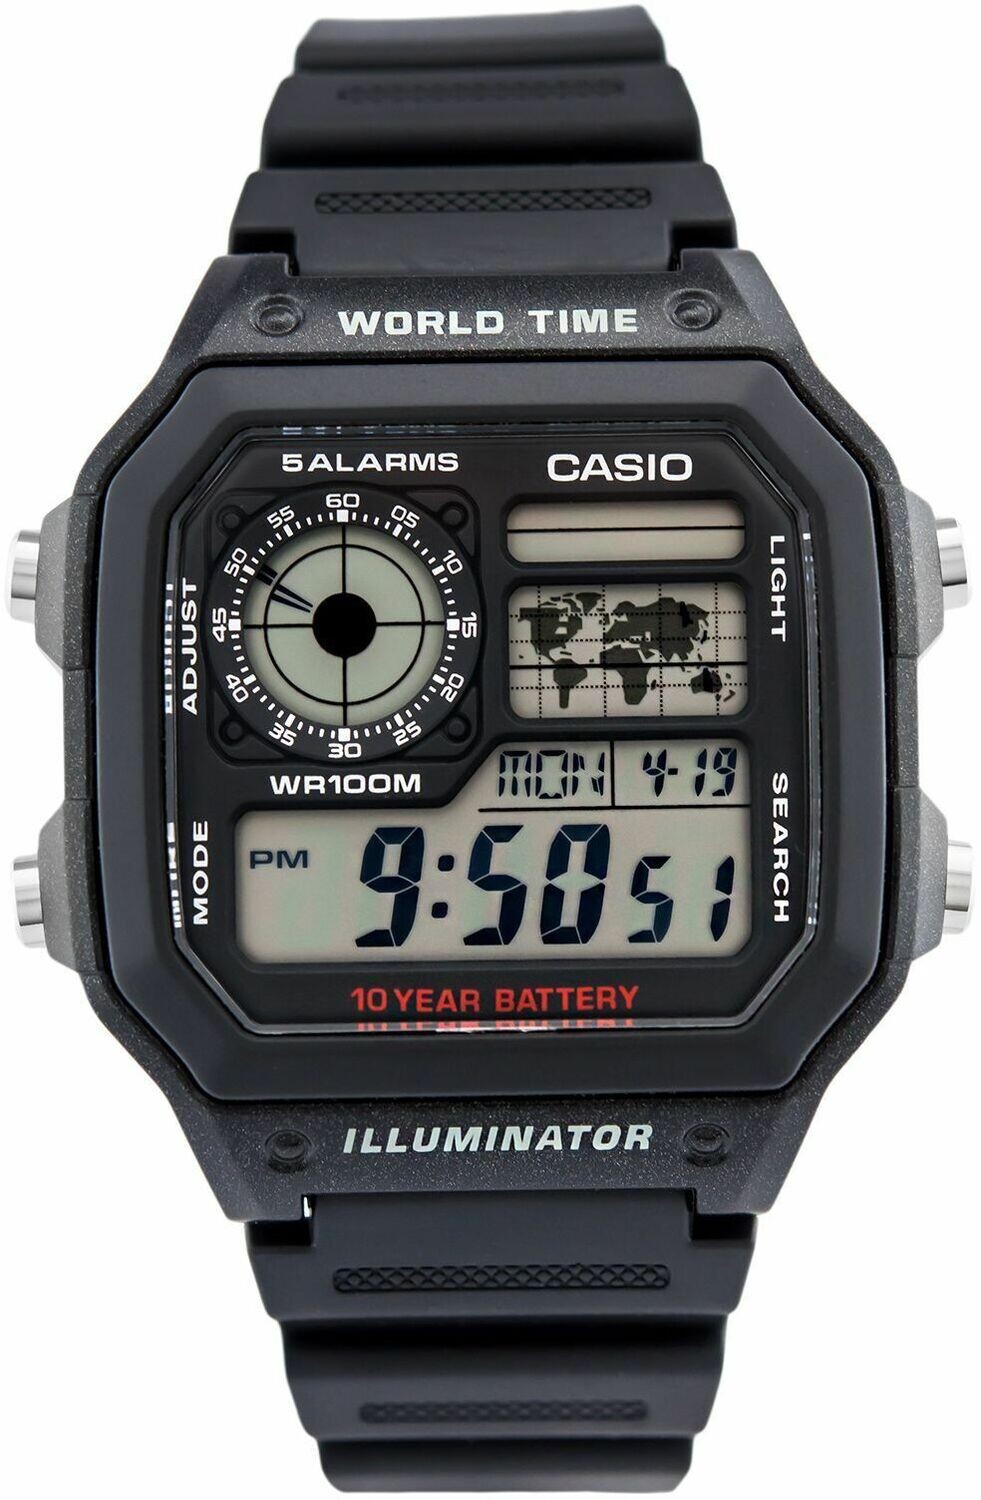 Casio AE-1200WH-1AV World time 5 alarms 10 year battery 100m WR rubber band sport men’s watch